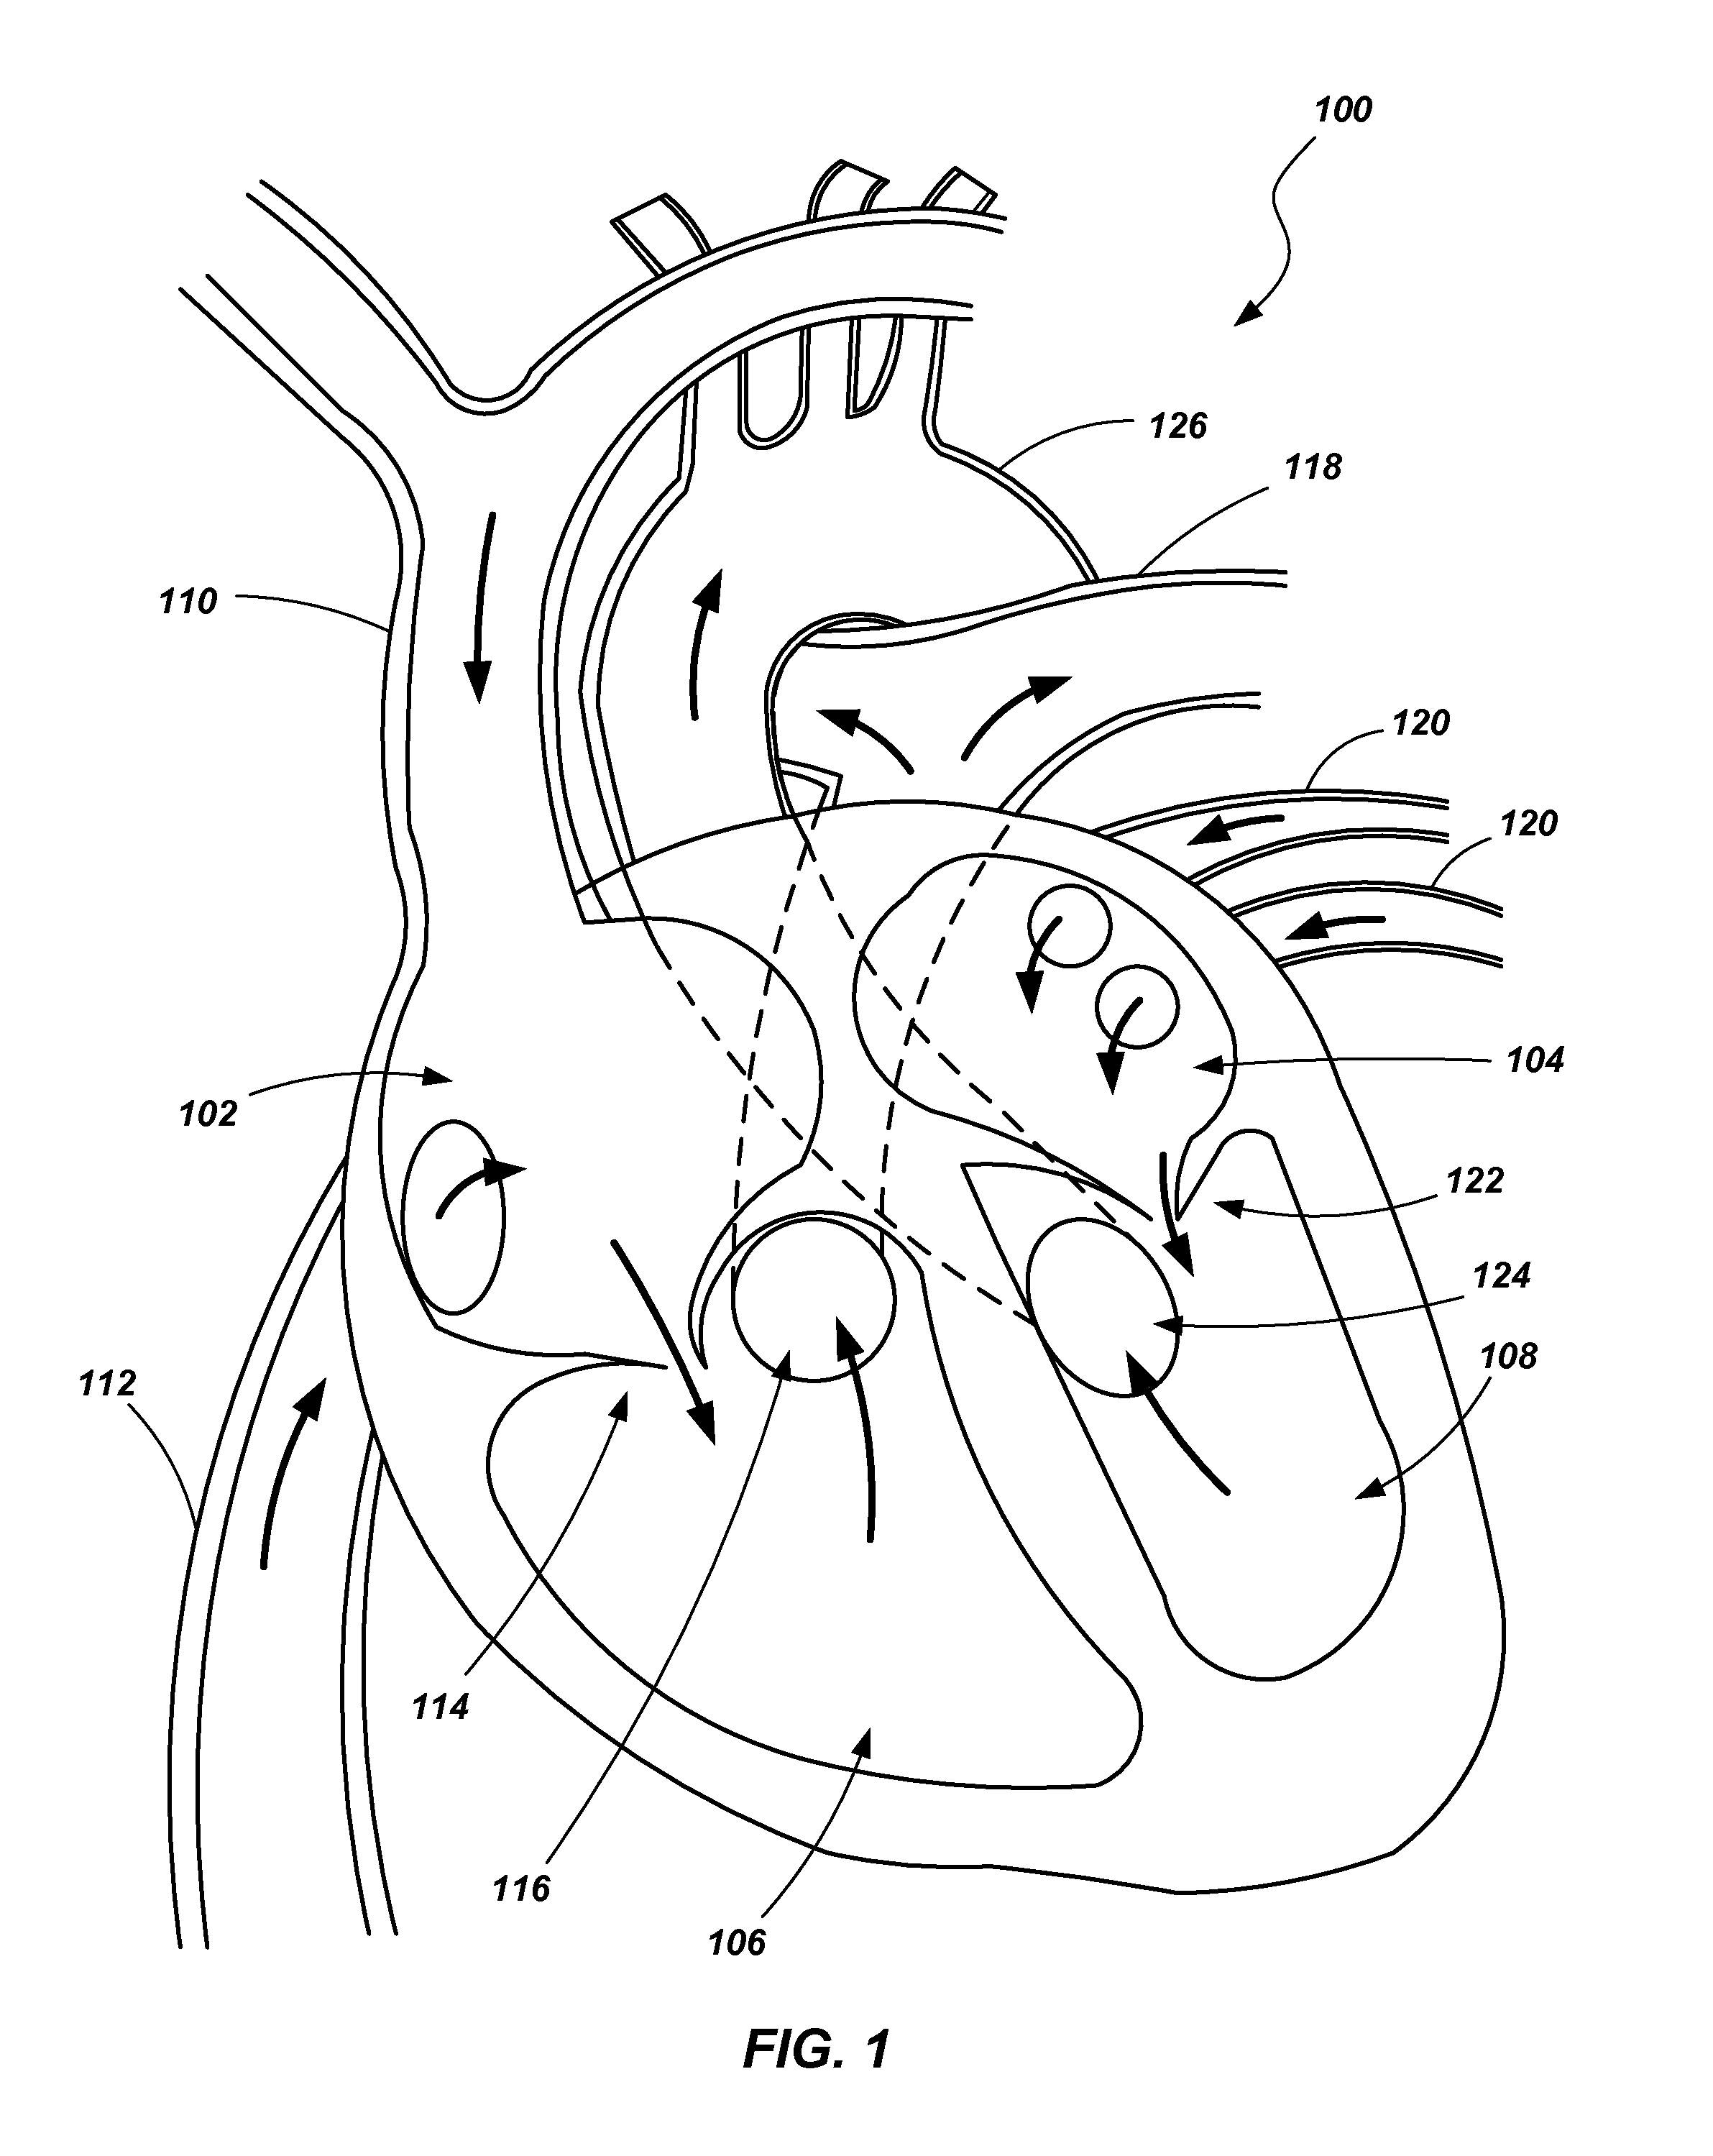 Ventricular assist device and related methods